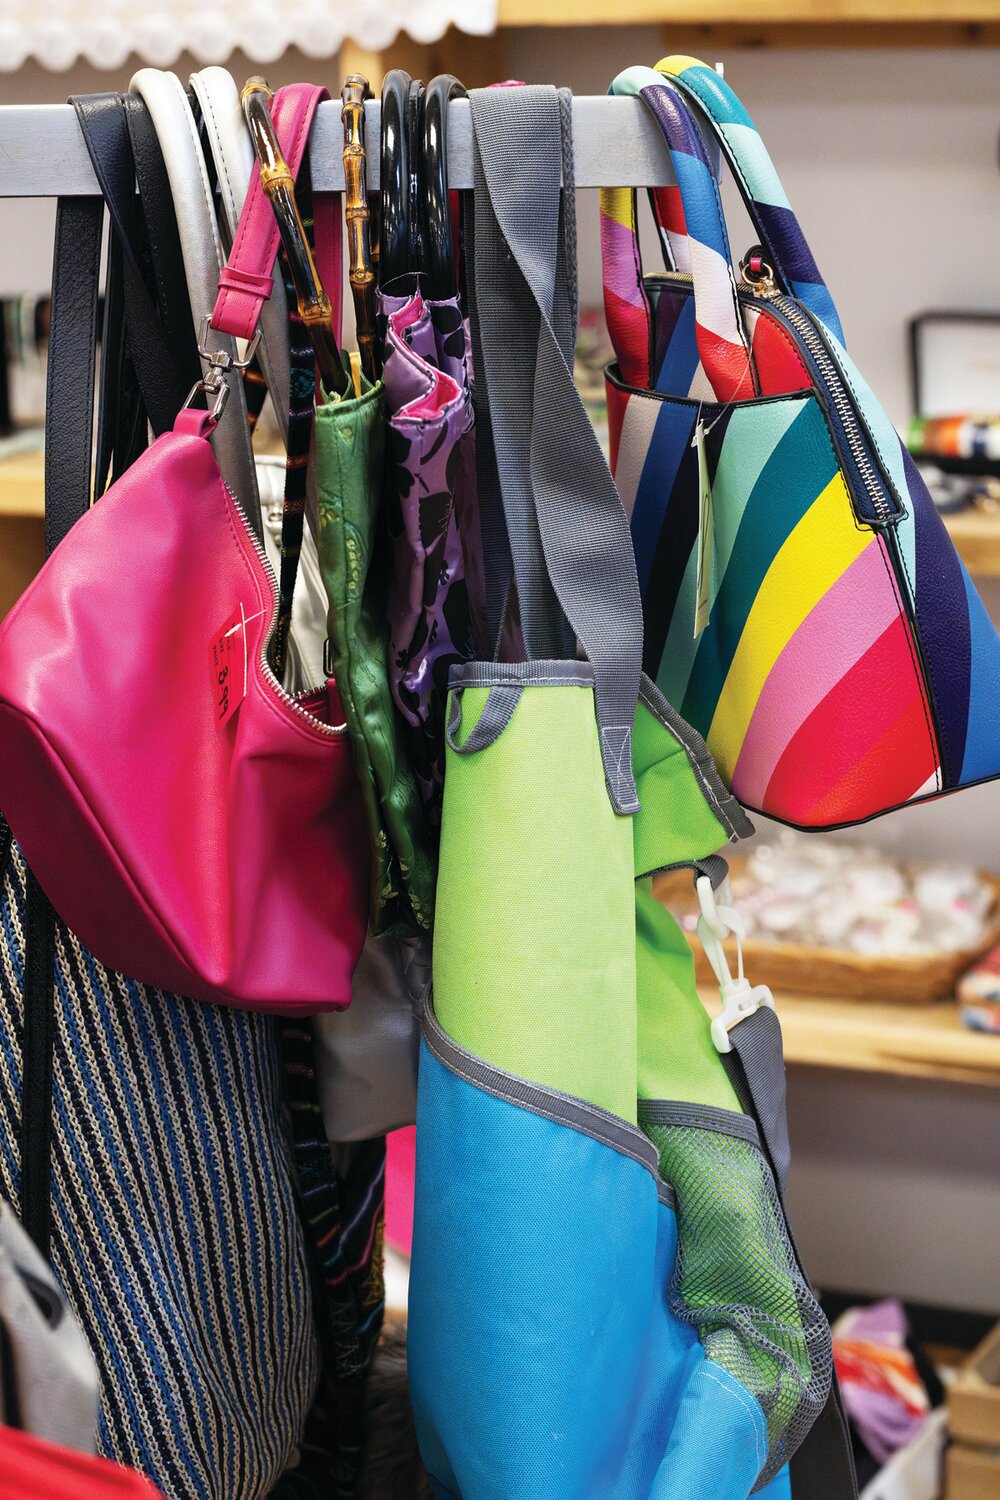 Bags of various colors and styles hang on a rack waiting to be bought at Worthwhile Wear.